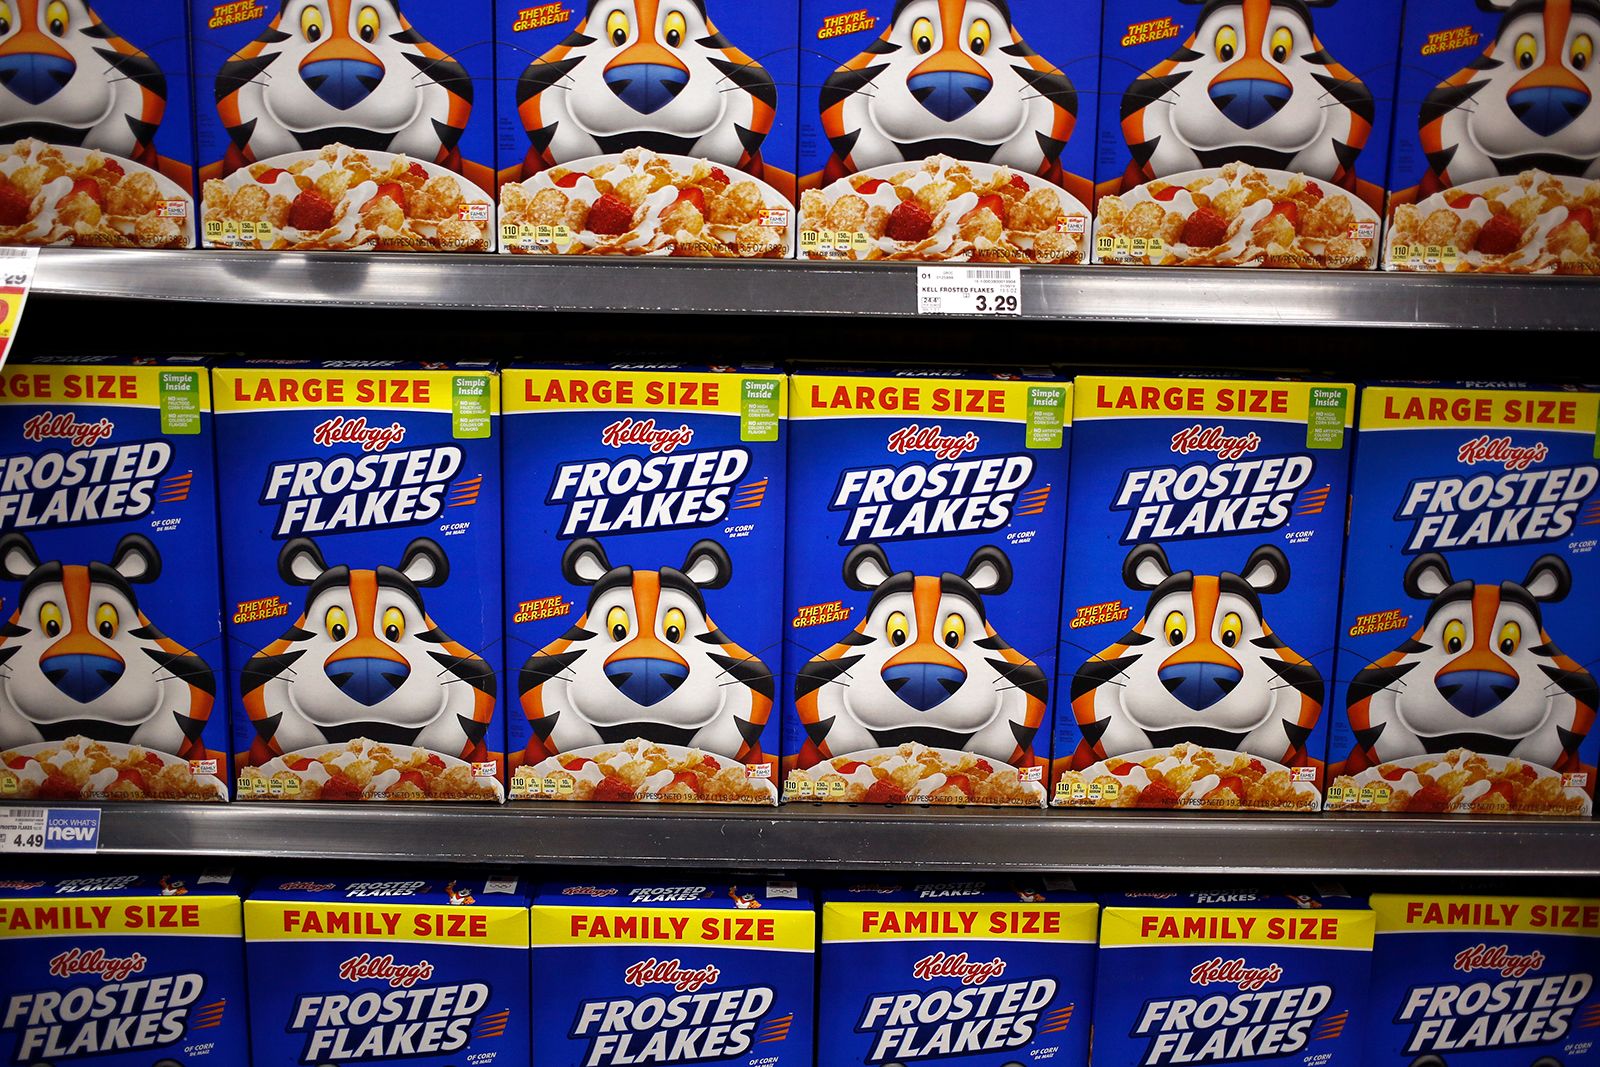 Why Kellogg is turning its back on Frosted Flakes and Froot Loops